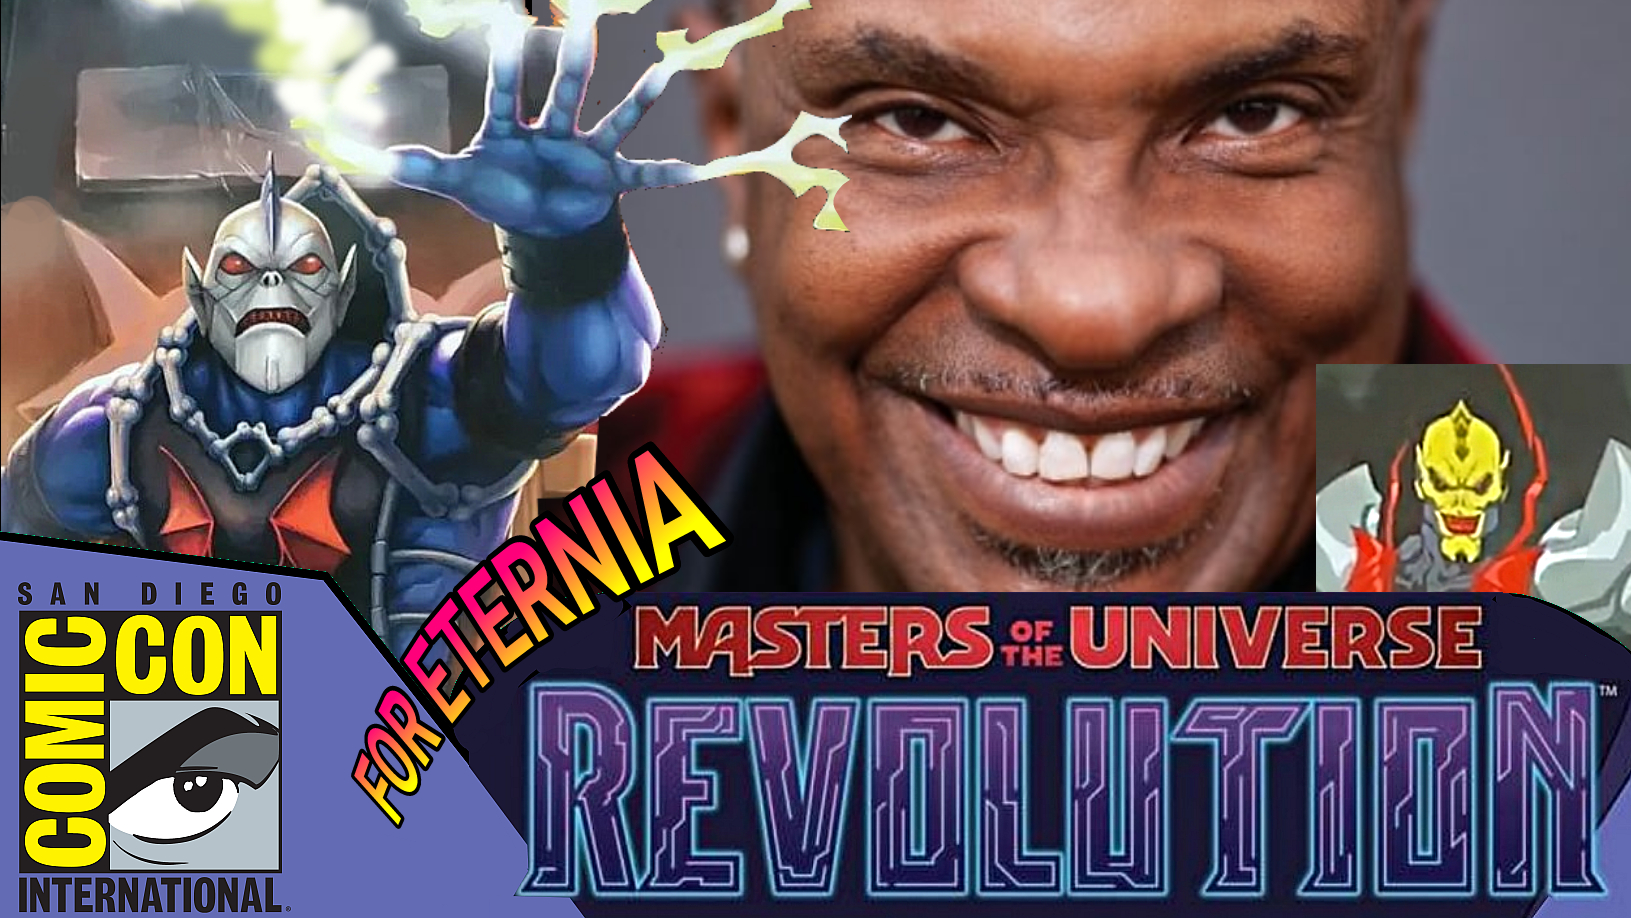 Actor Keith David will play HORDAK in ”Masters of the Universe: Revolution”, plus Hordak’s appearance is revealed!